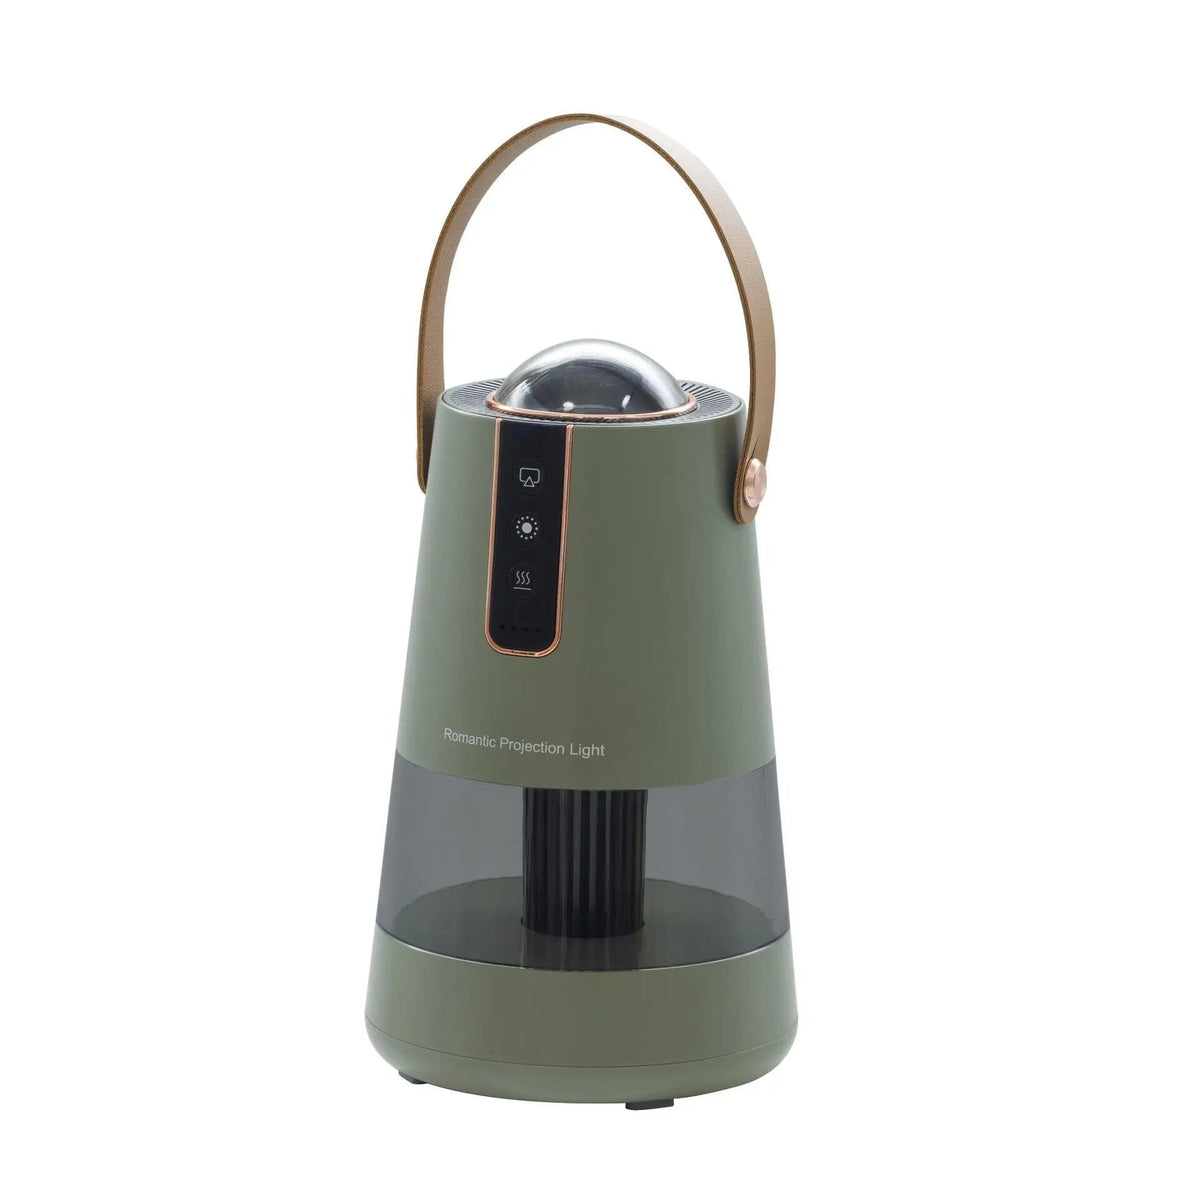 MosquitoGuard Portable Repellent Night Light MosquitoGuard Portable Repellent Night Light The Black Gold Green 